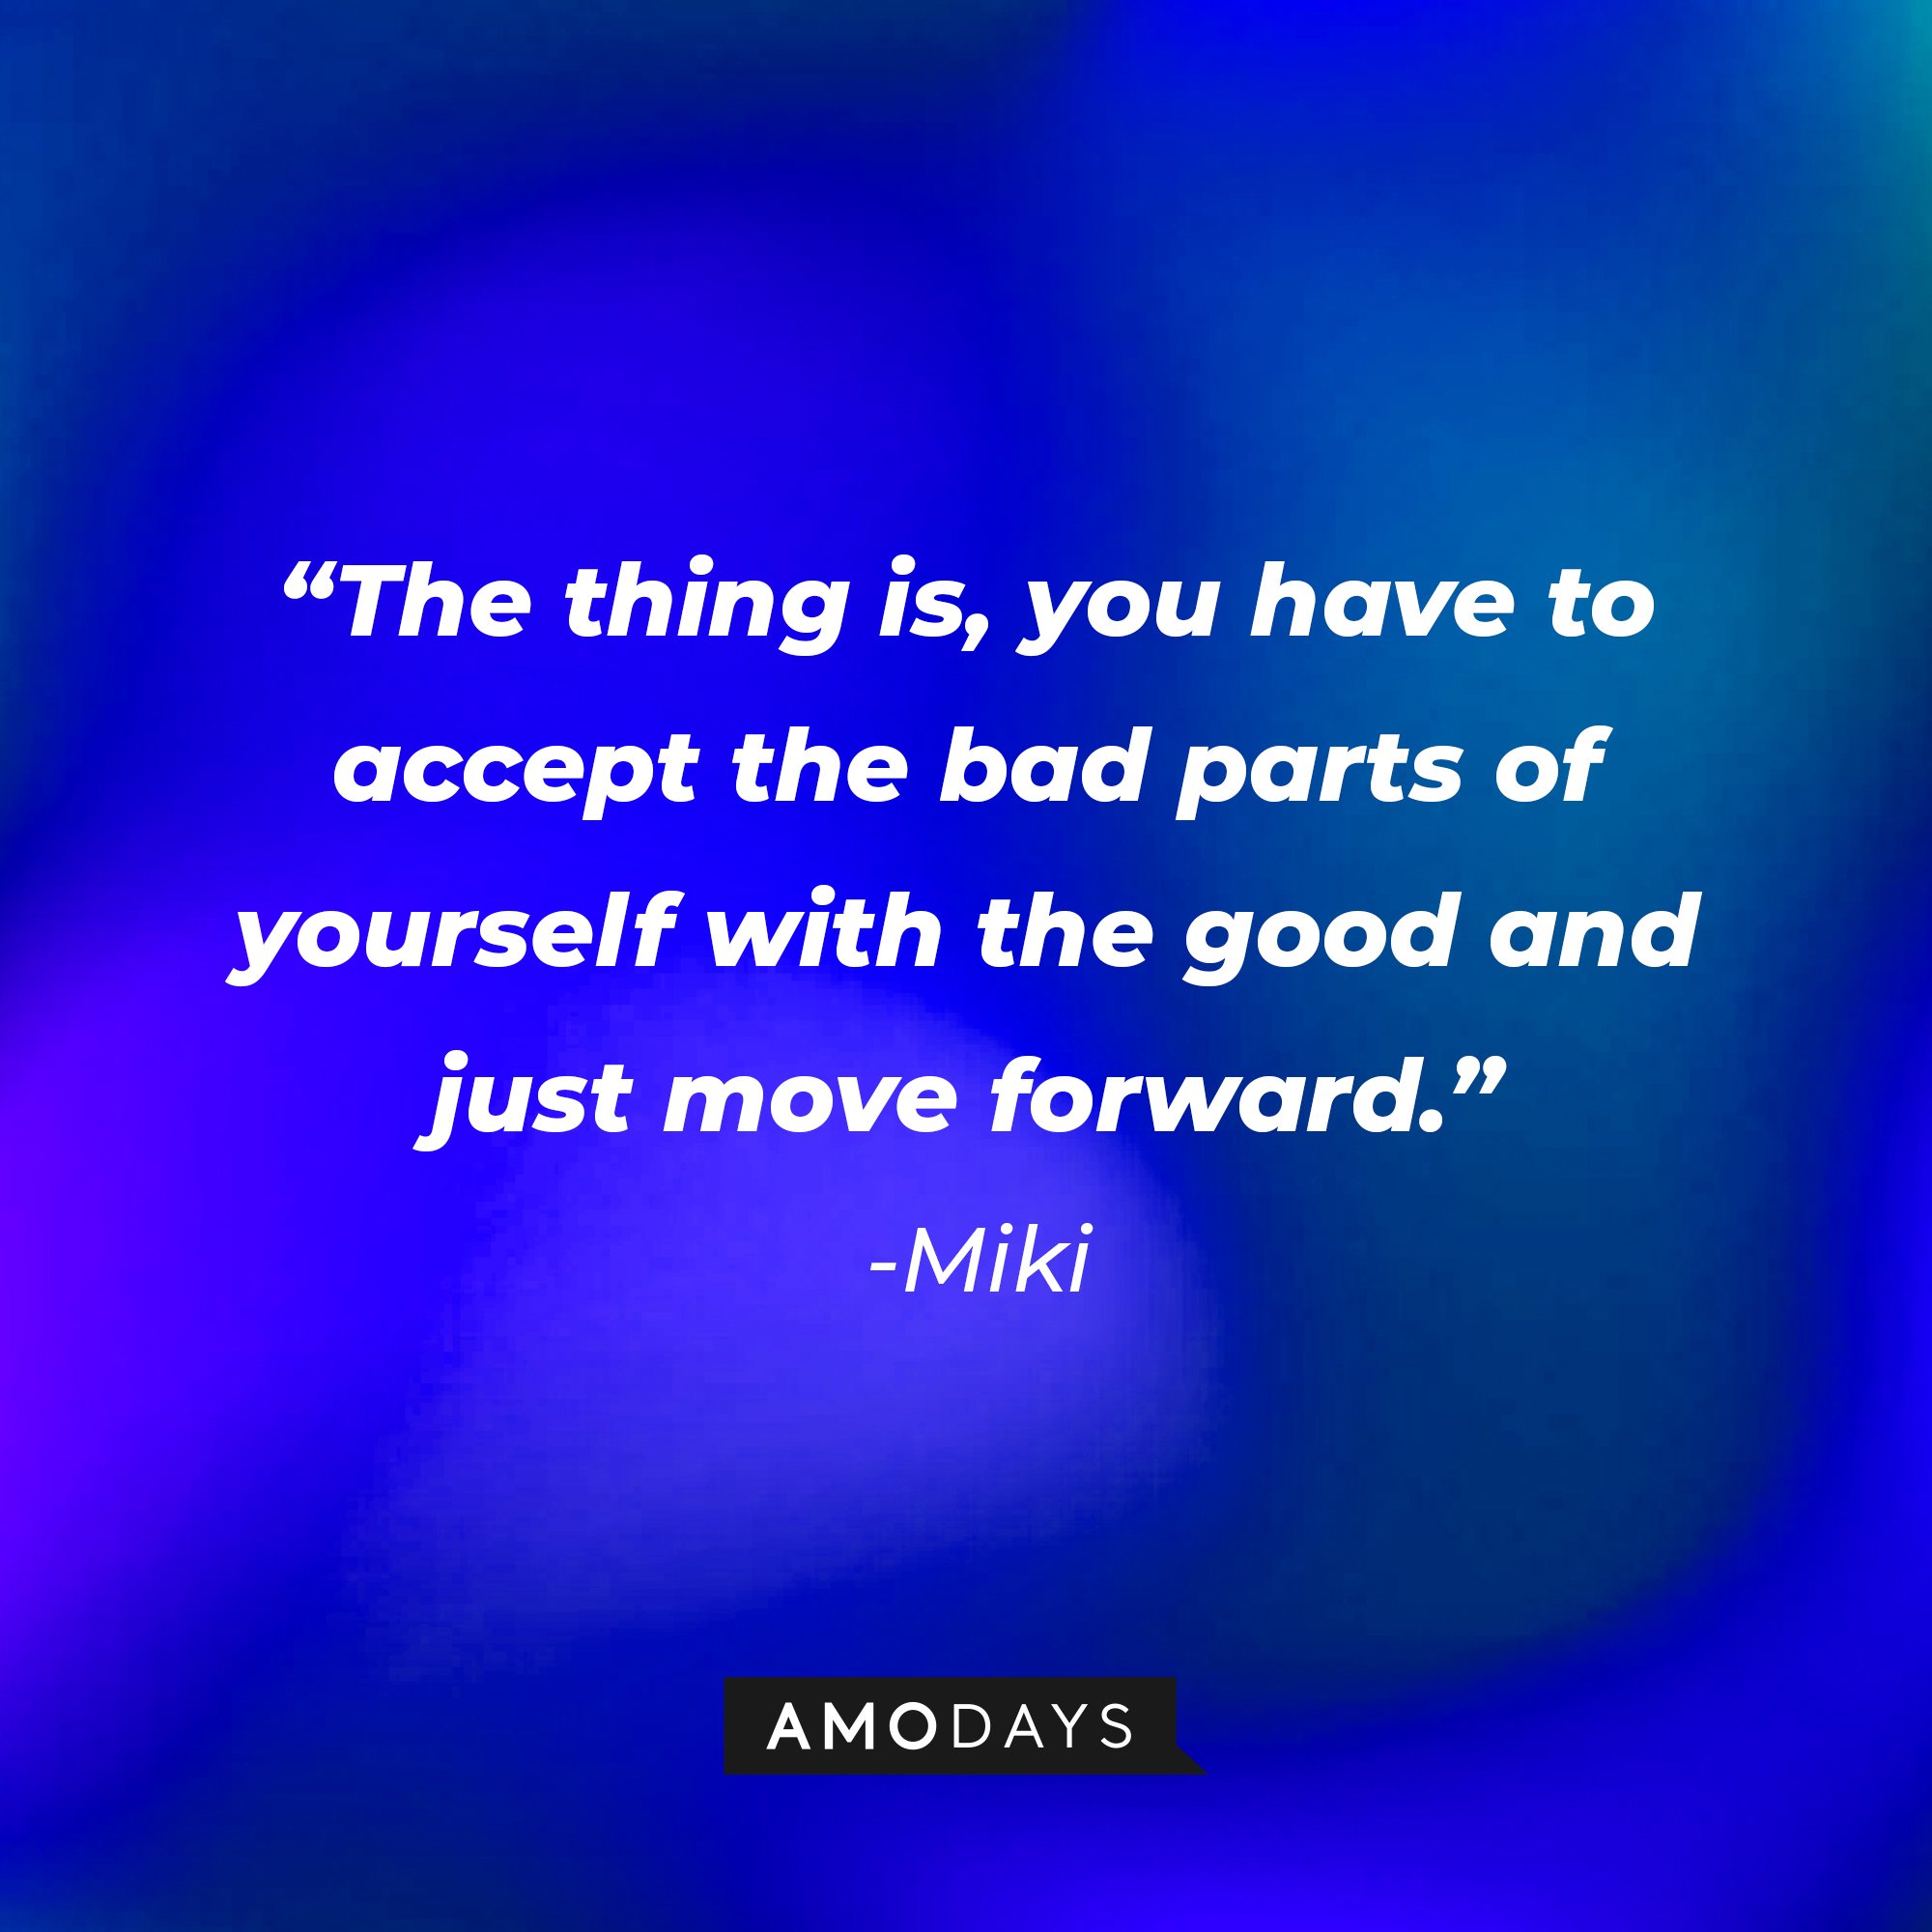 Miki’s quote: "The thing is, you have to accept the bad parts of yourself with the good and just move forward." | Image: AmoDays  